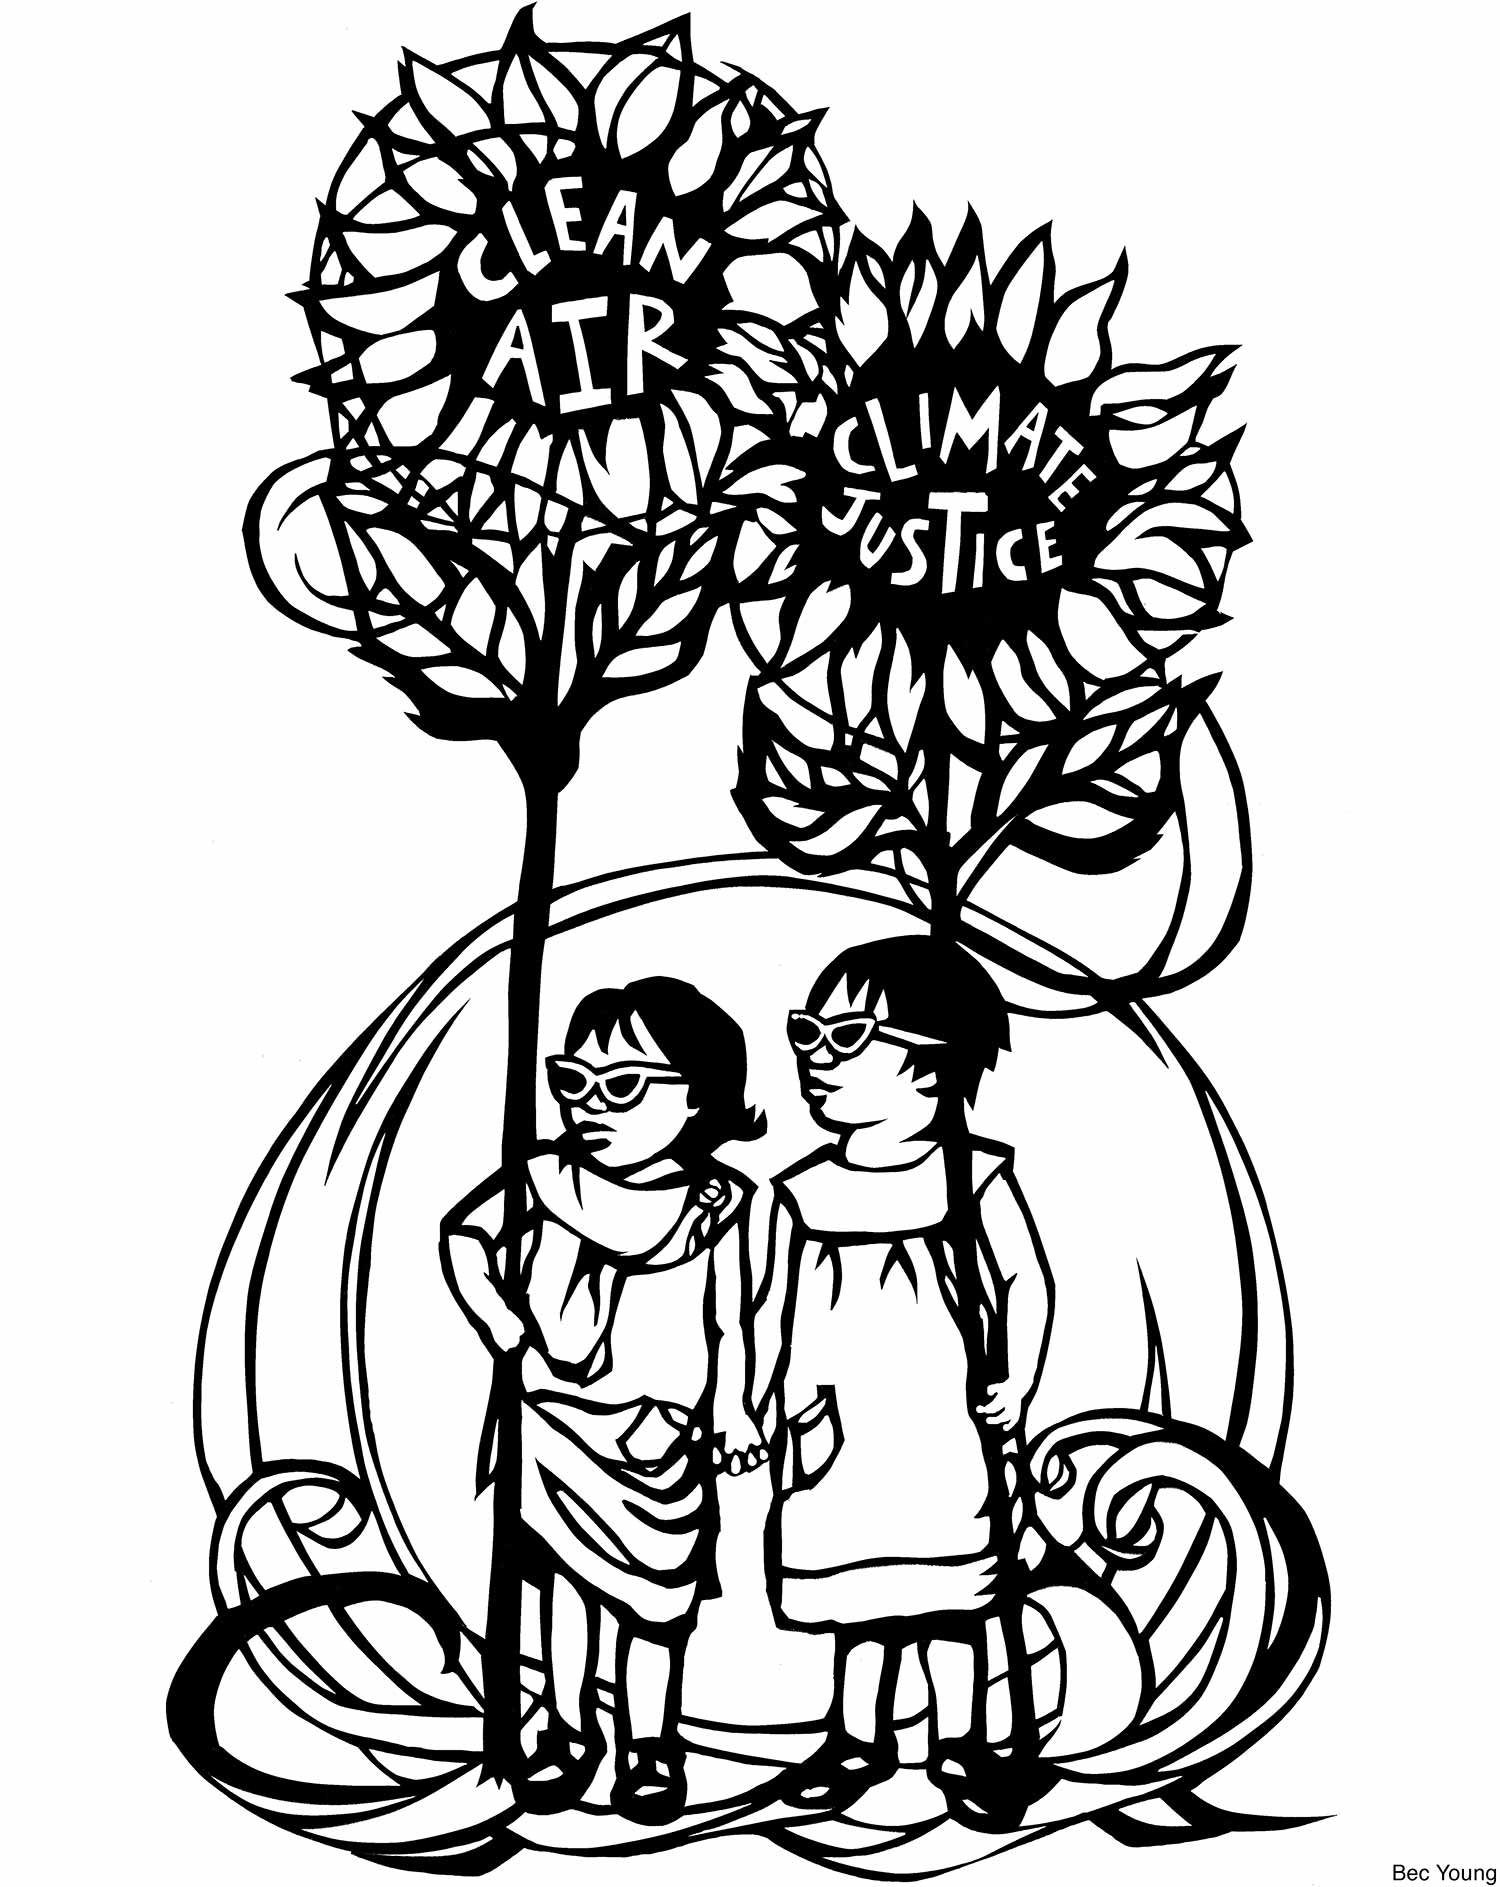 Black and white graphic coloring book image of two children standing in between giant sunflowers that say "clean air, climate justice"